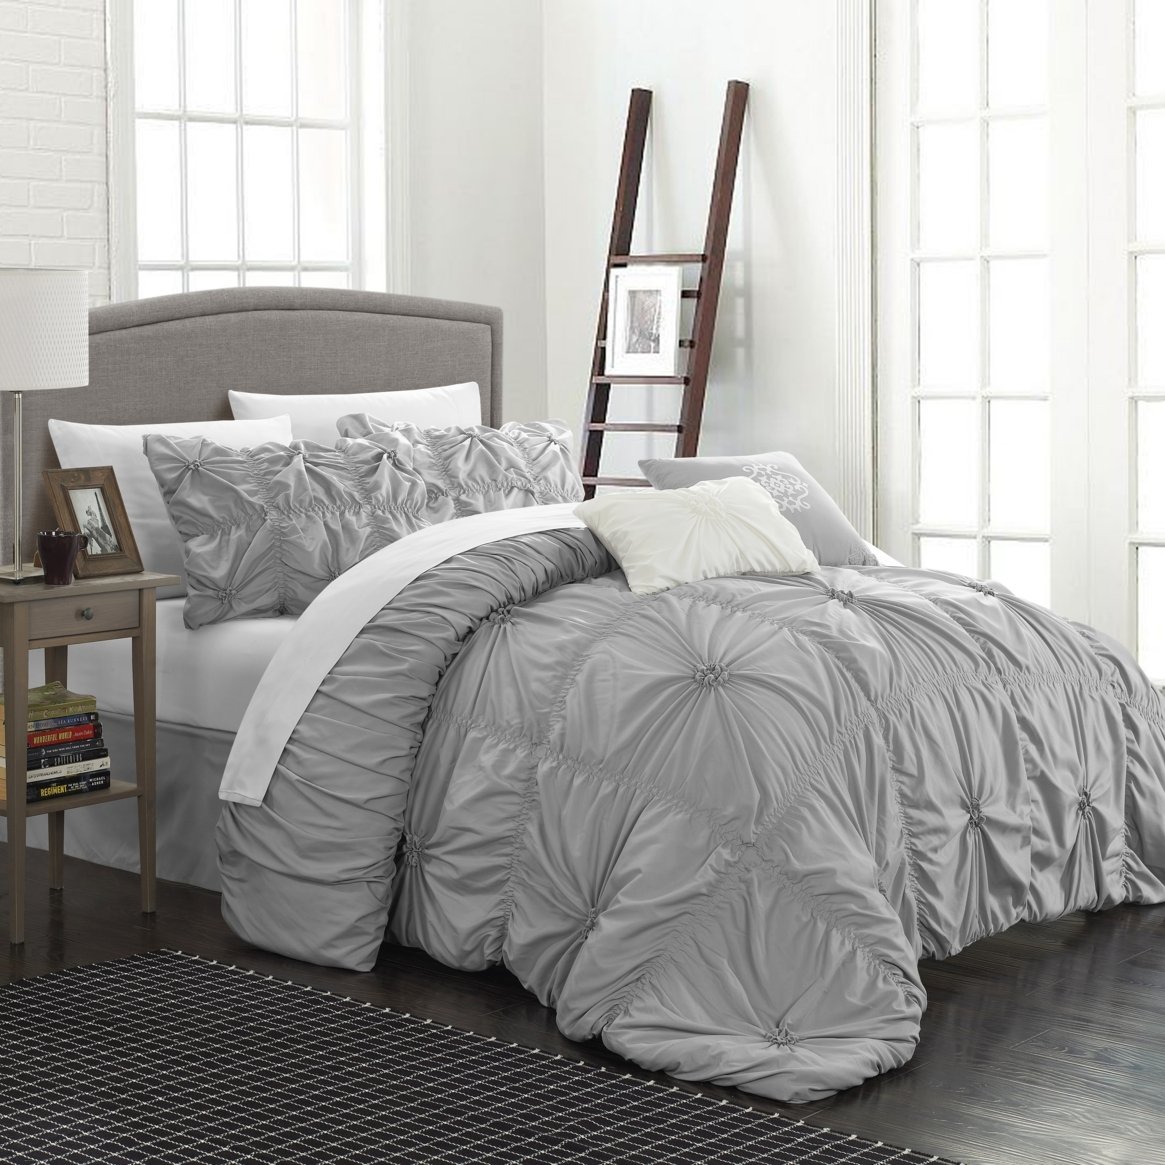 Hilton 10 Piece Comforter Set Floral Pinch Pleated Ruffled Designer Embellished Bed In A Bag Bedding - Silver, Queen